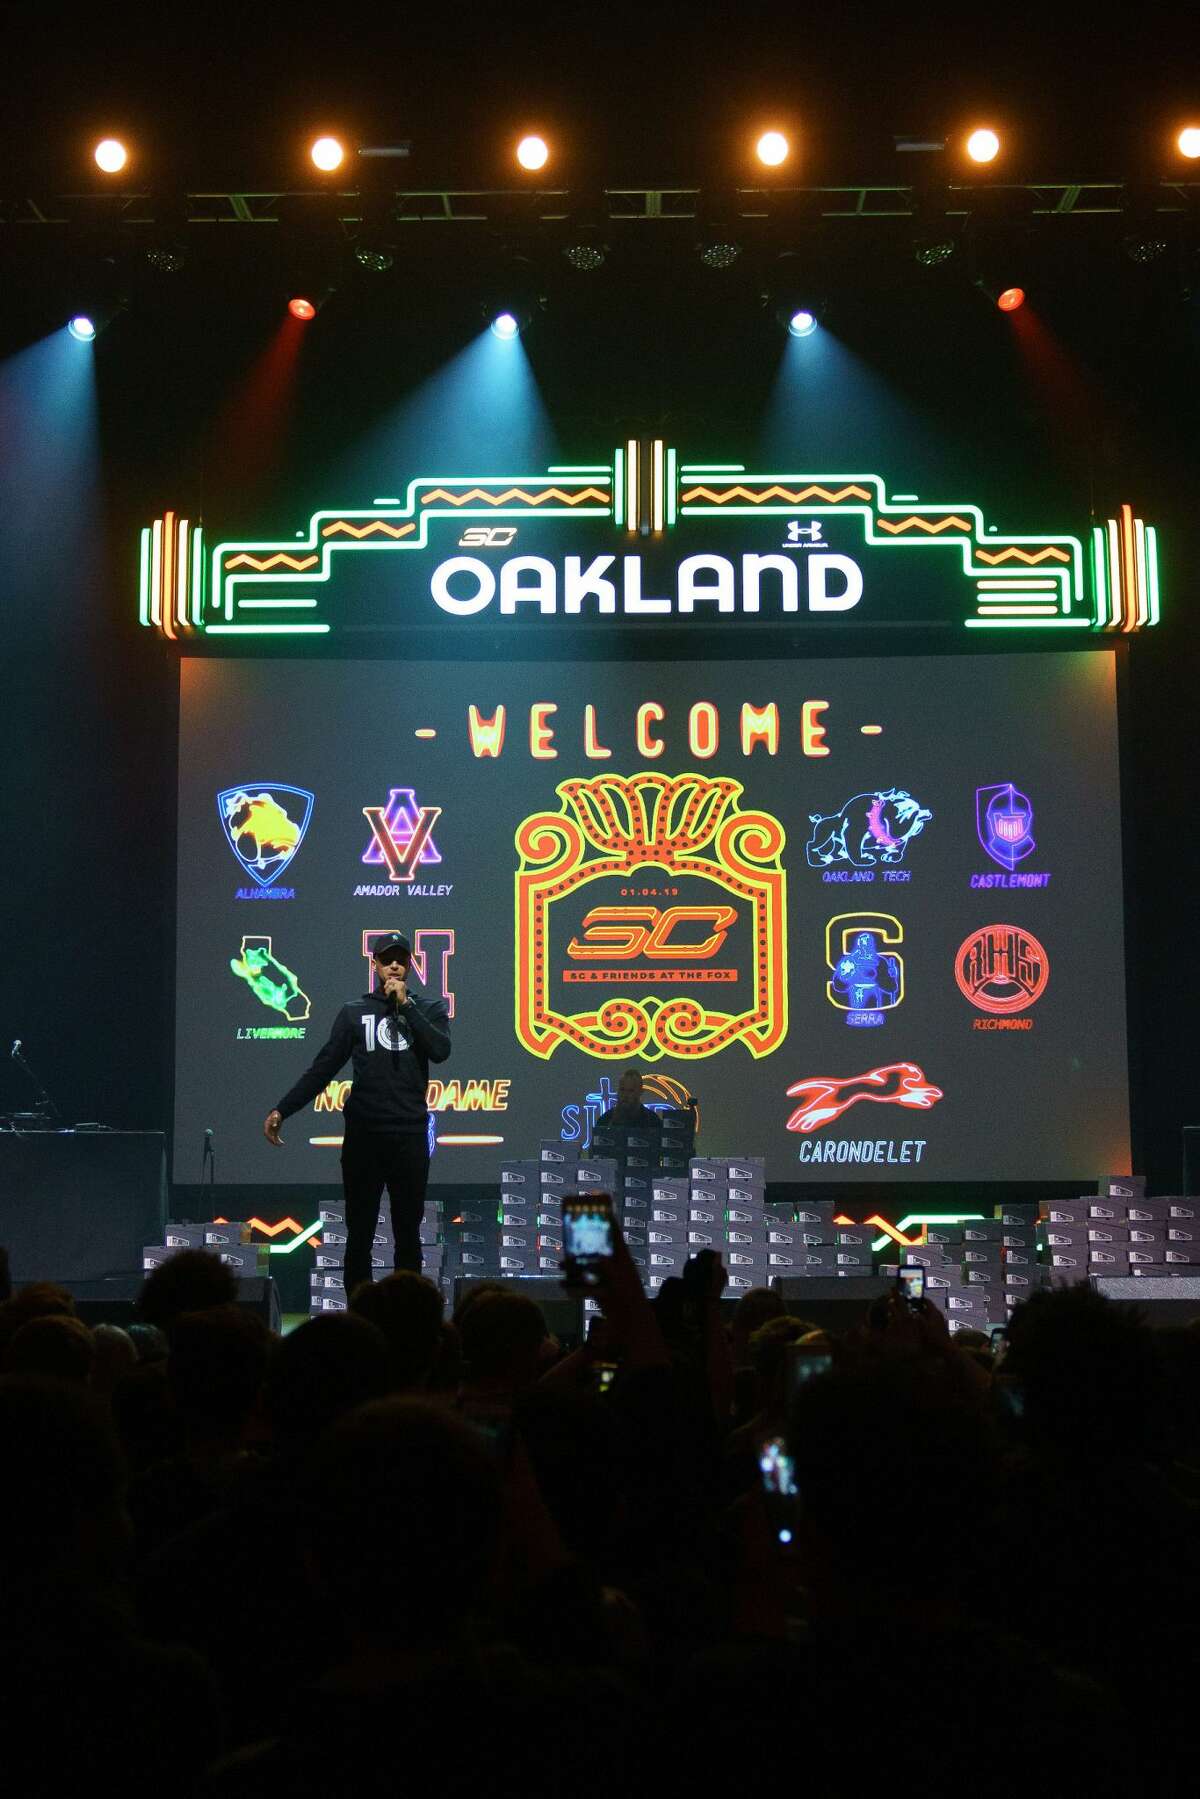 Steph Curry welcomes students from high schools from all over the Bay Area to the party he hosted at Fox Theater in Oakland on Friday, Jan. 4.